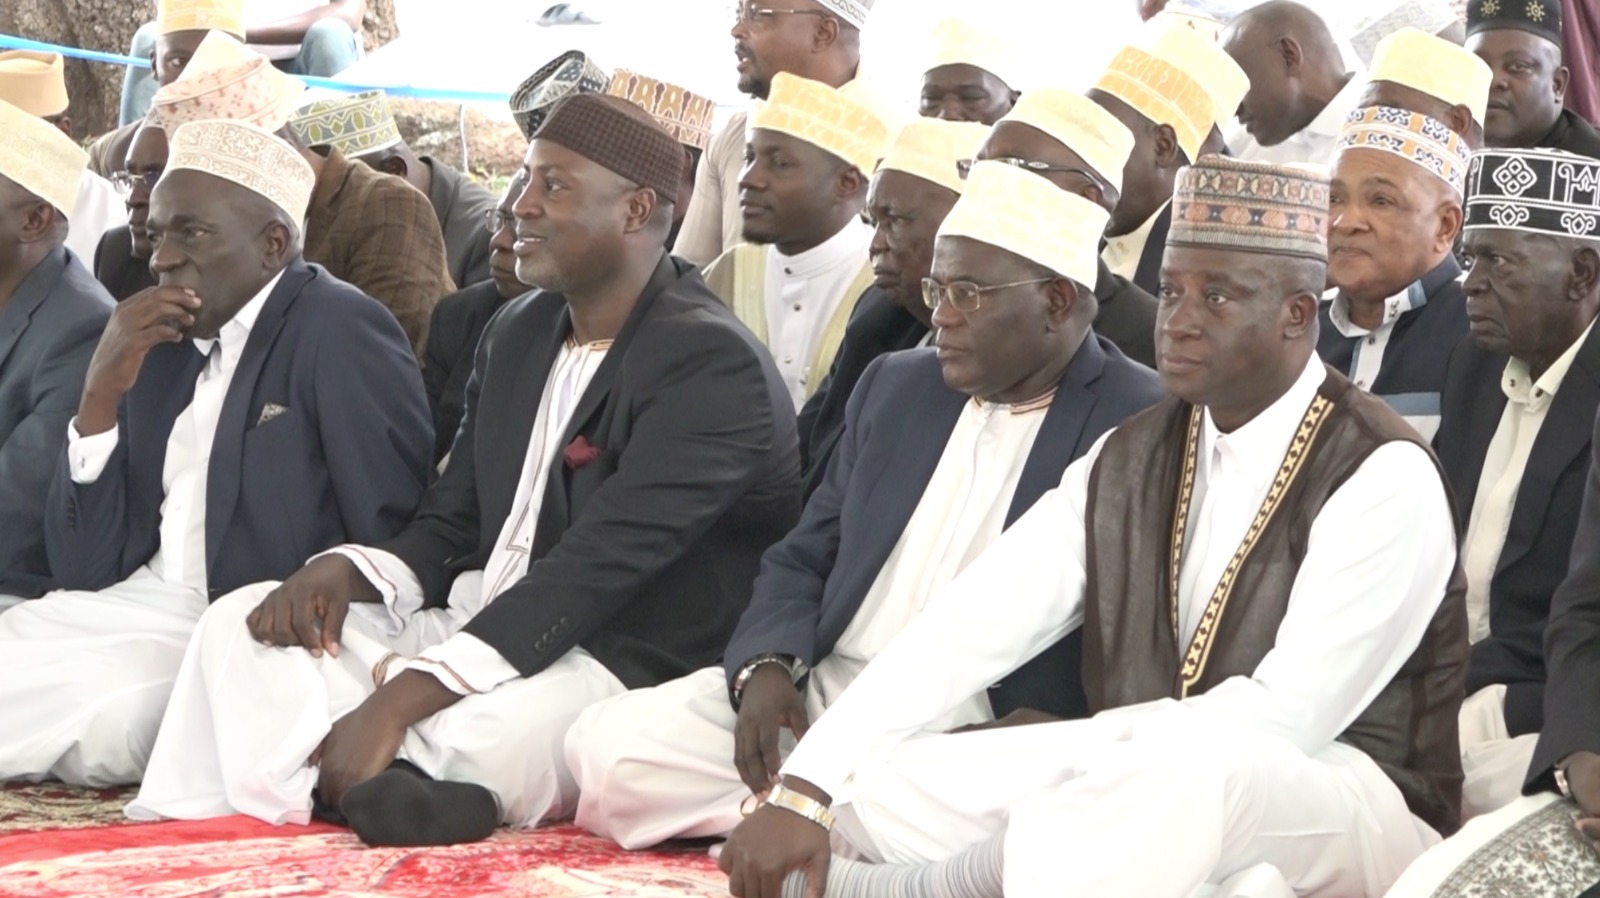 Muslims commemorate 129 years of return of Prince Mbogo from exile